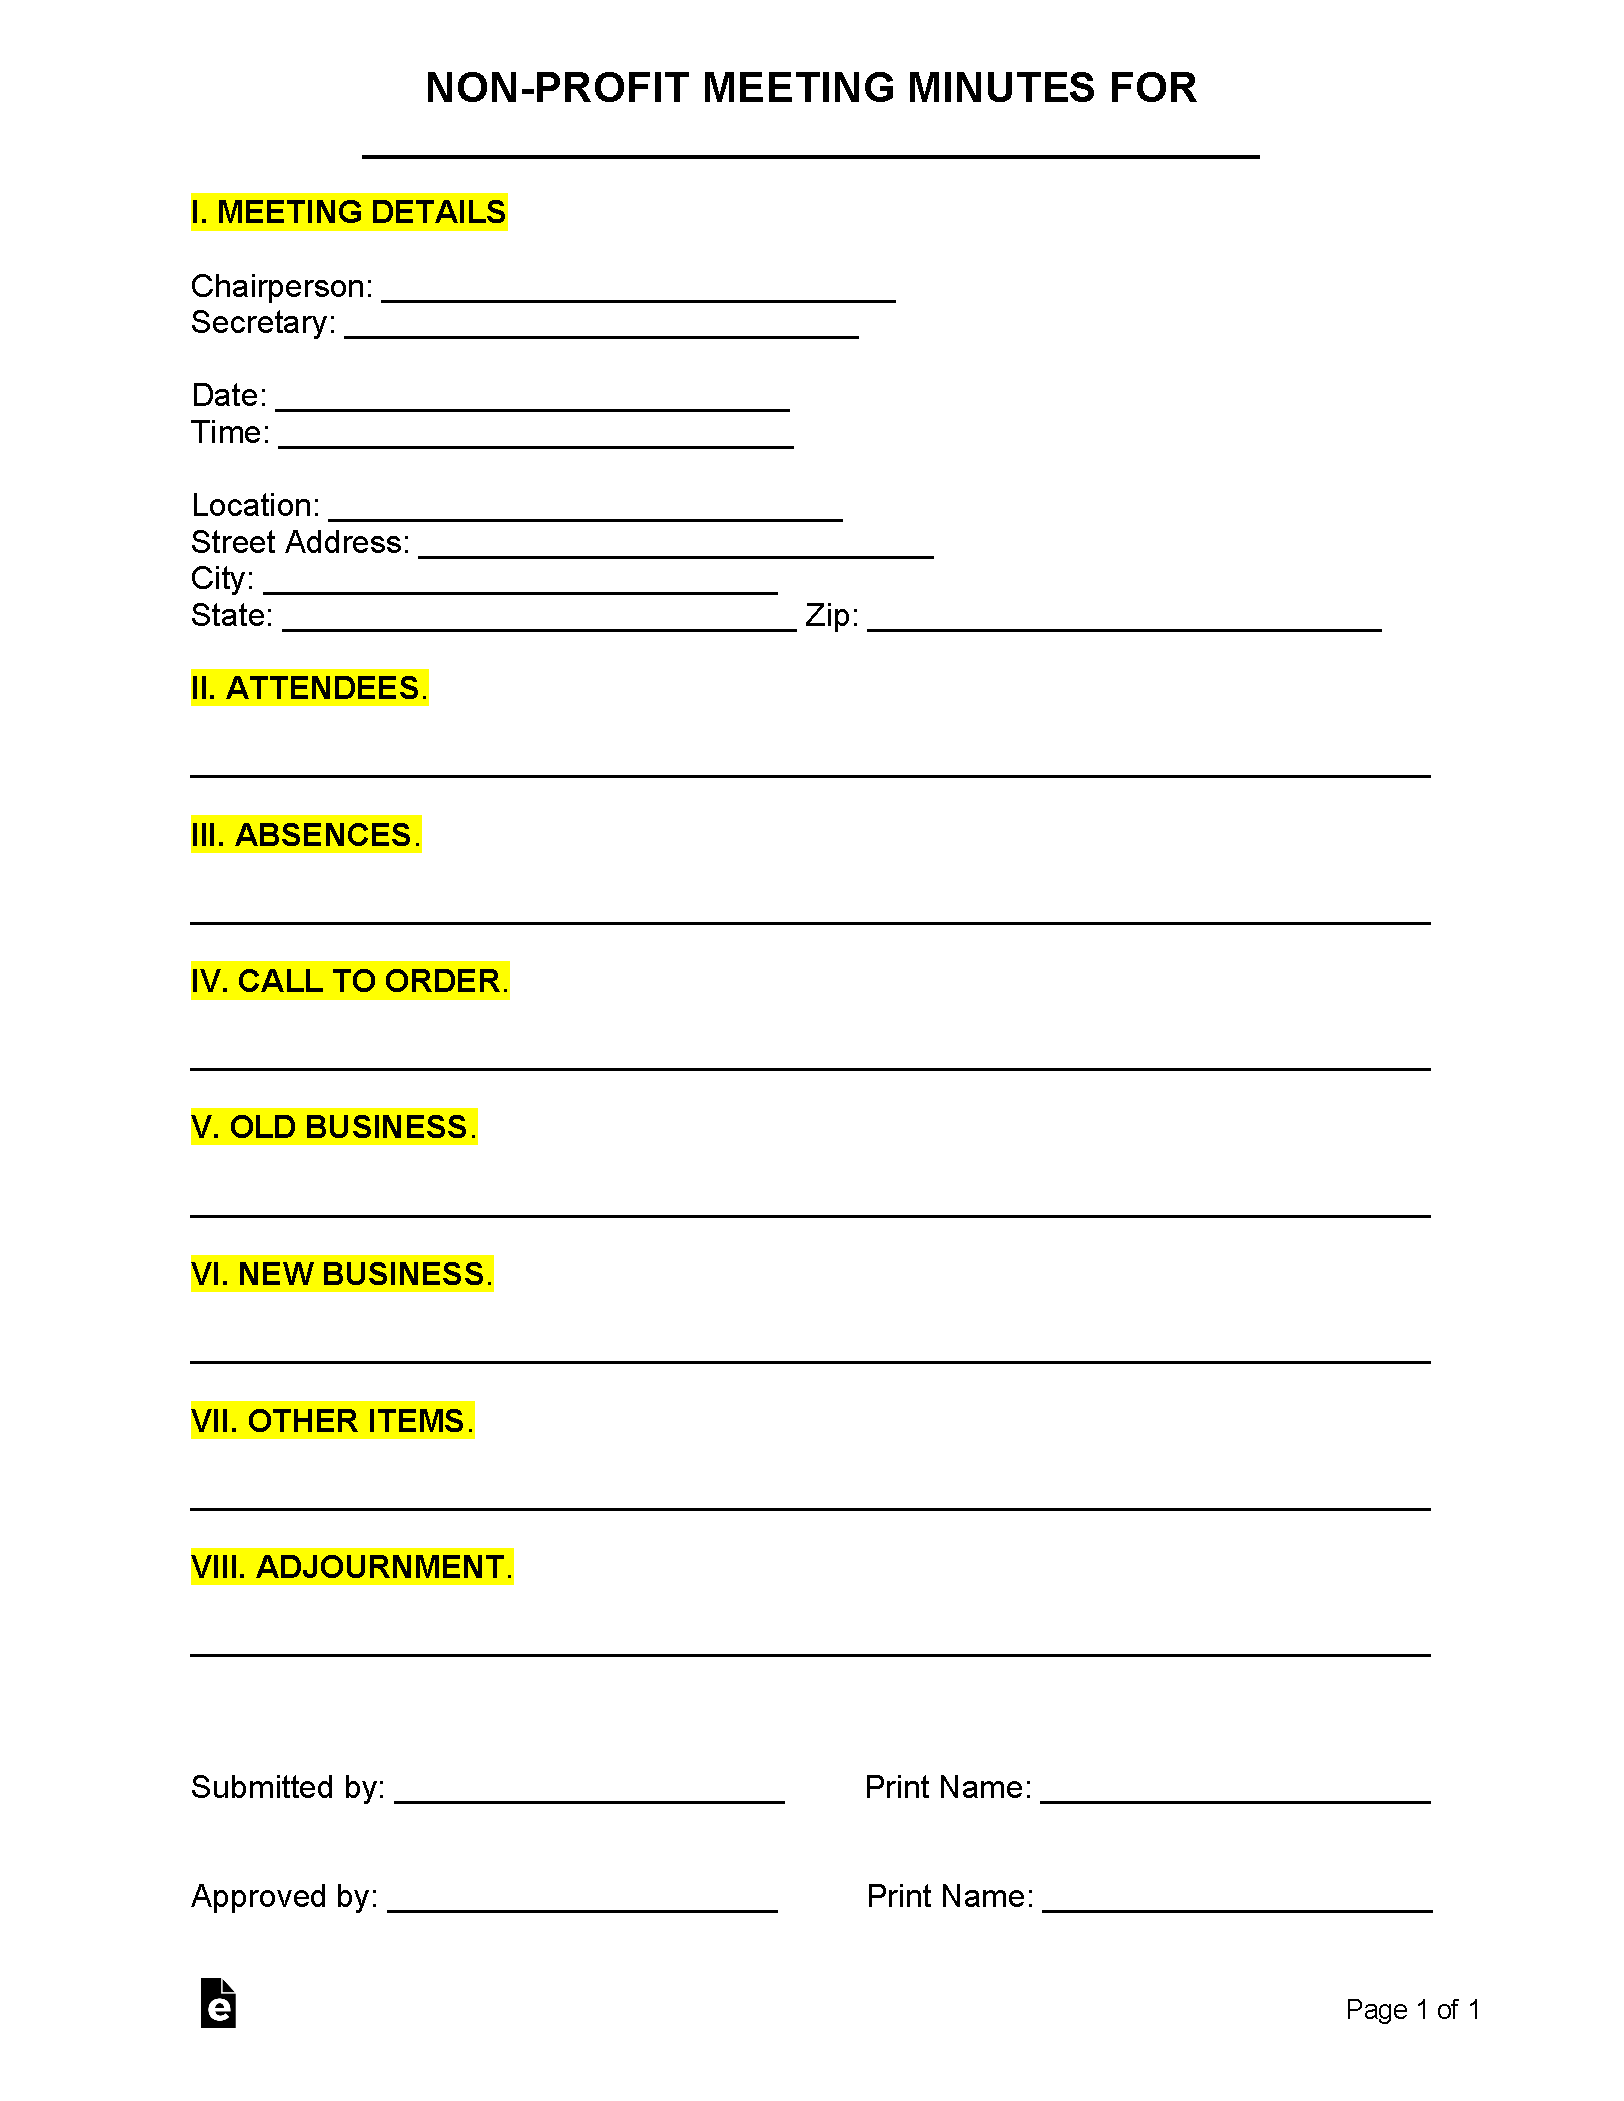 Non-Profit Meeting Minutes Template | Sample